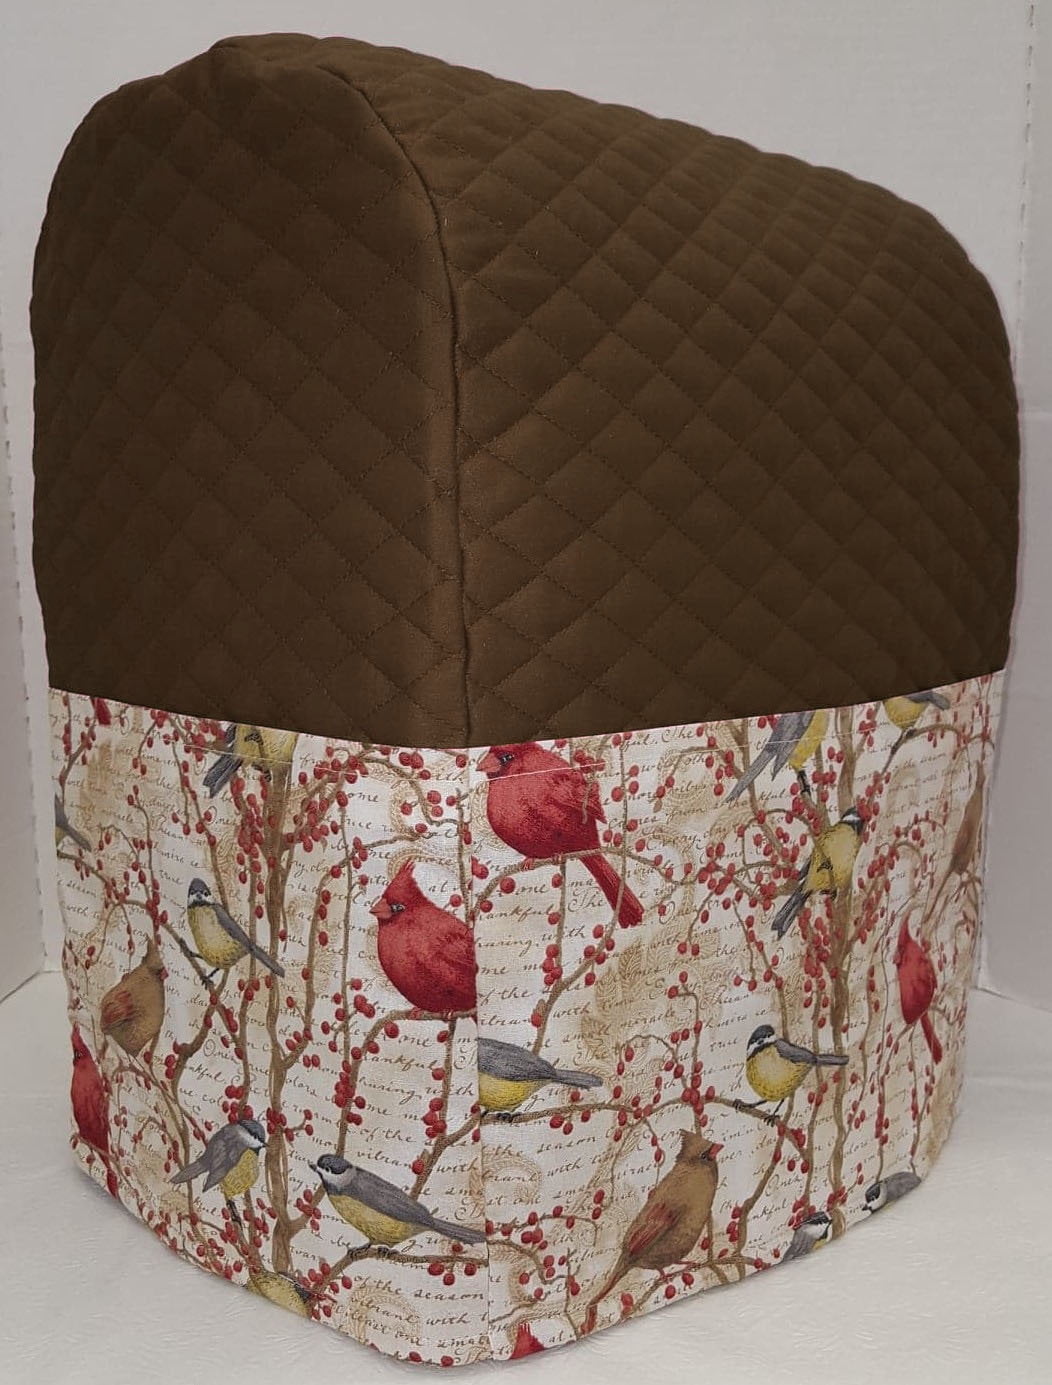 Birds & Berries Cover Compatible with Kitchenaid SodaStream